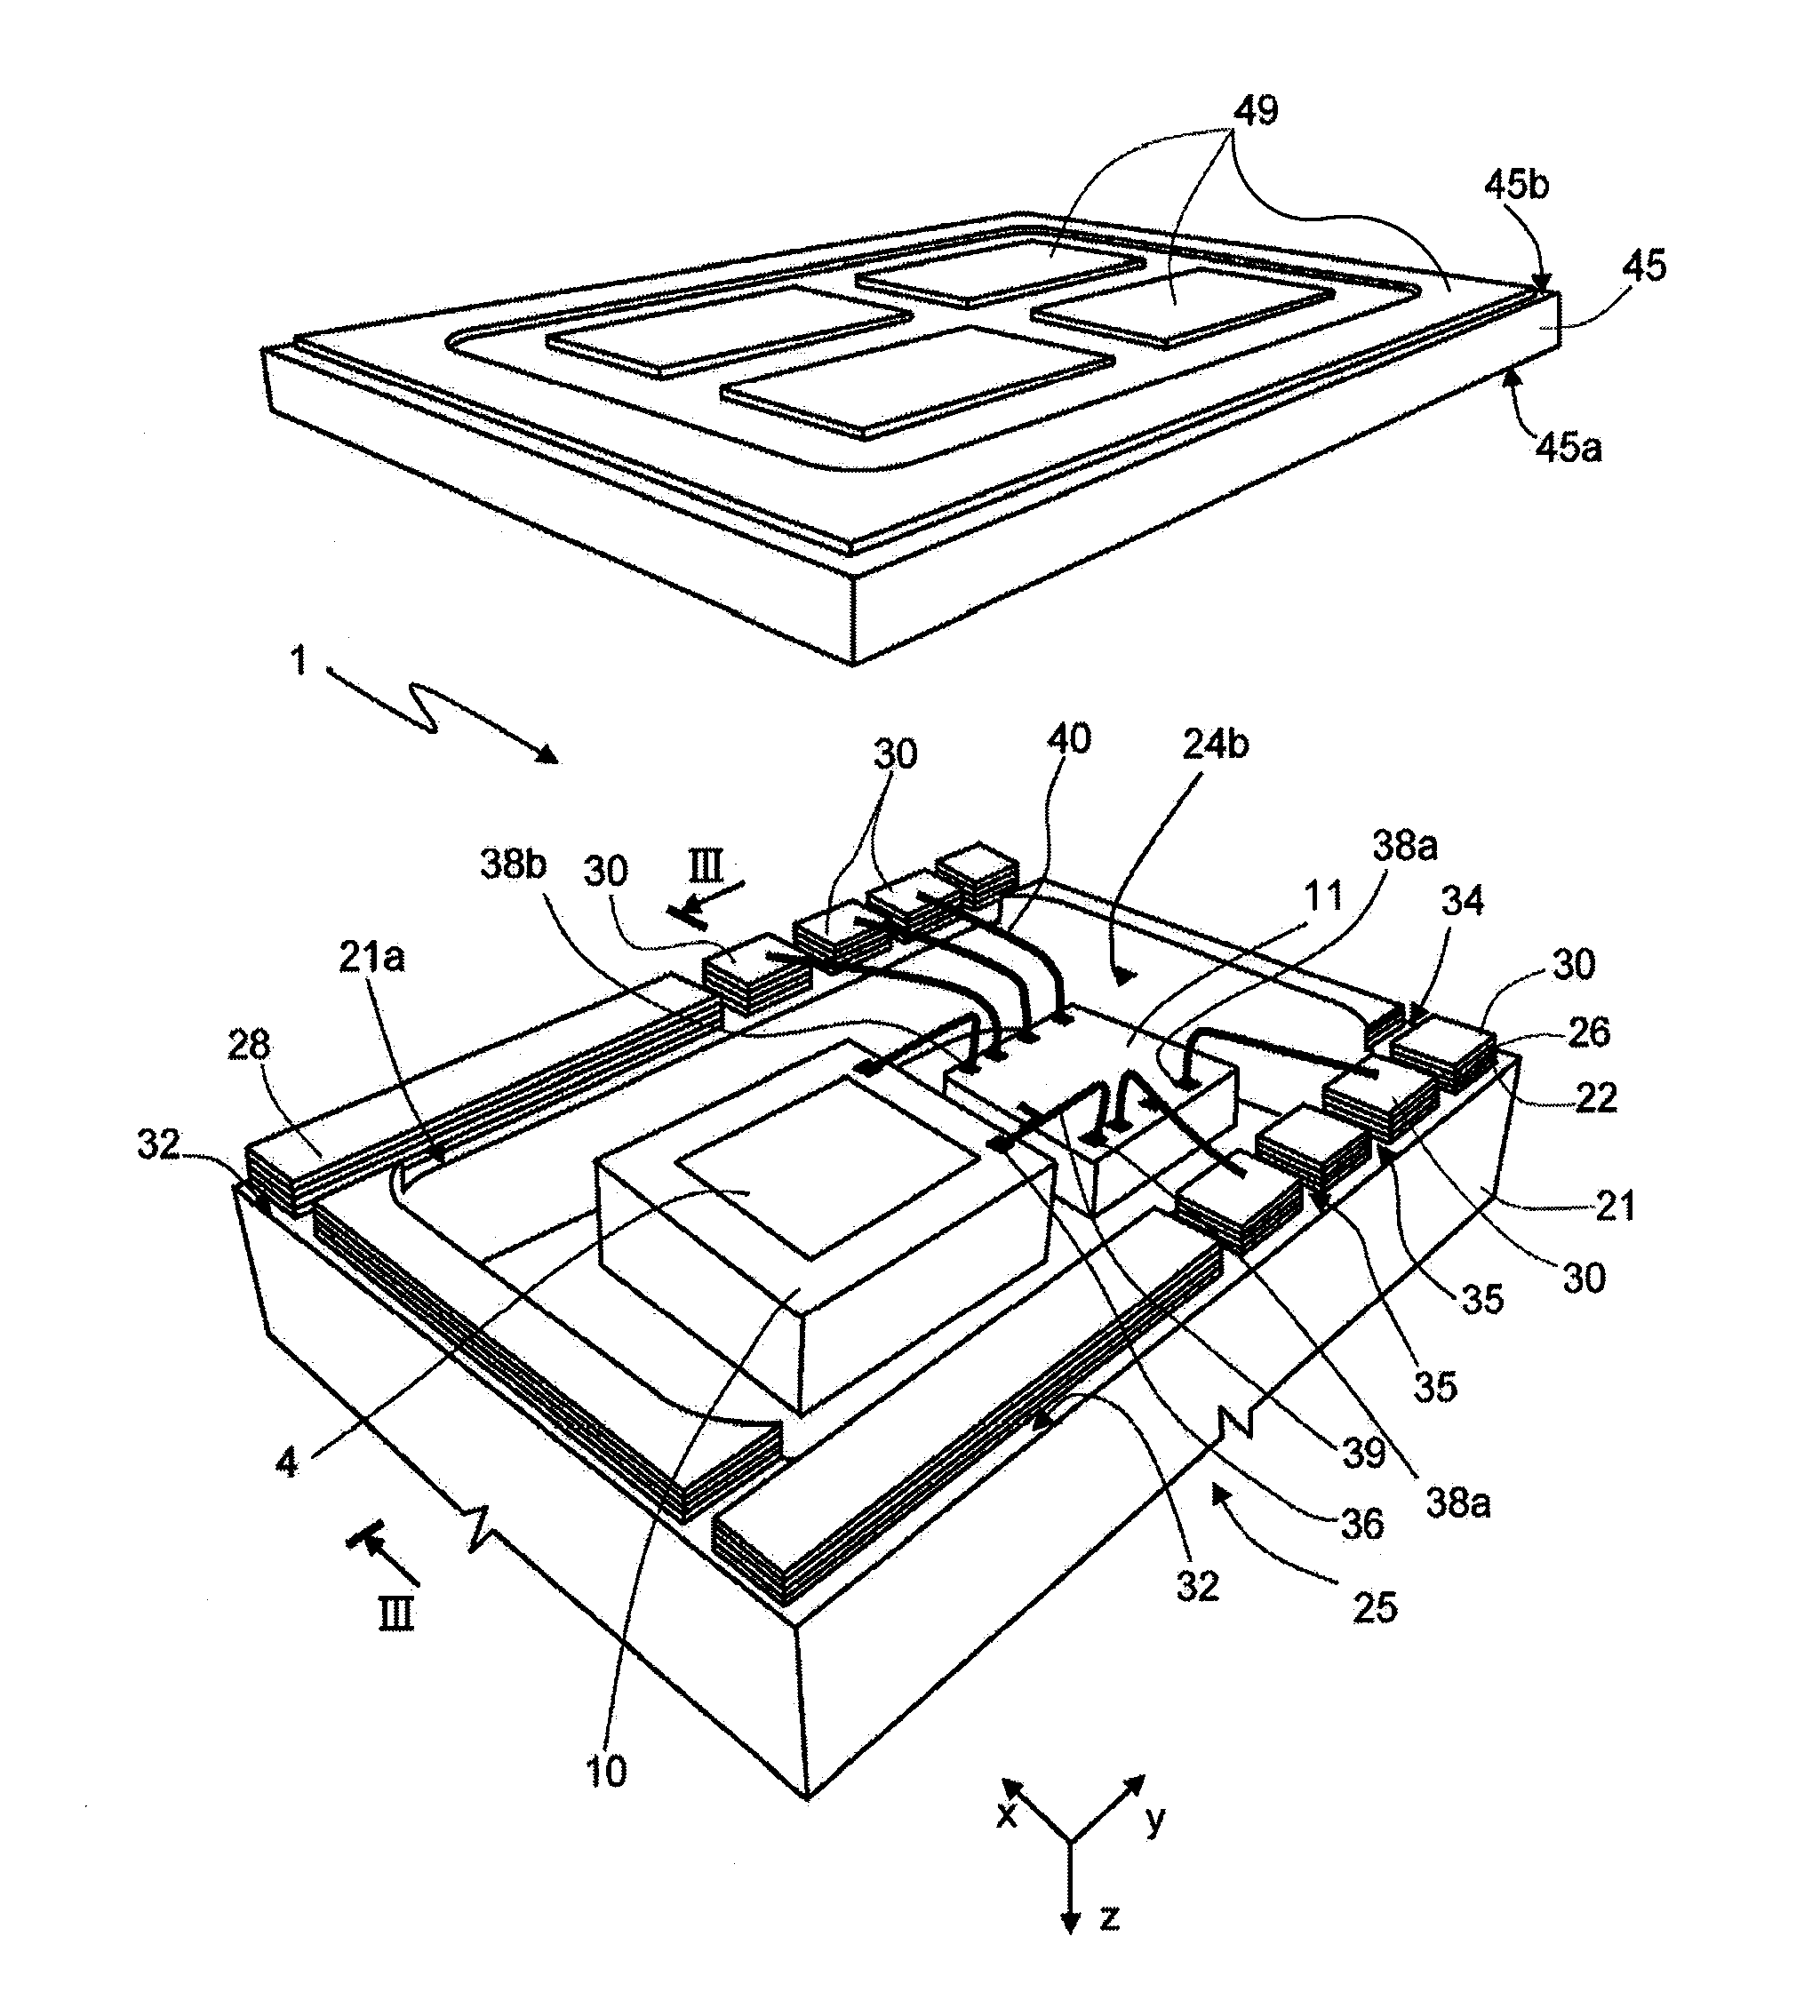 Microelectromechanical transducer and corresponding assembly process